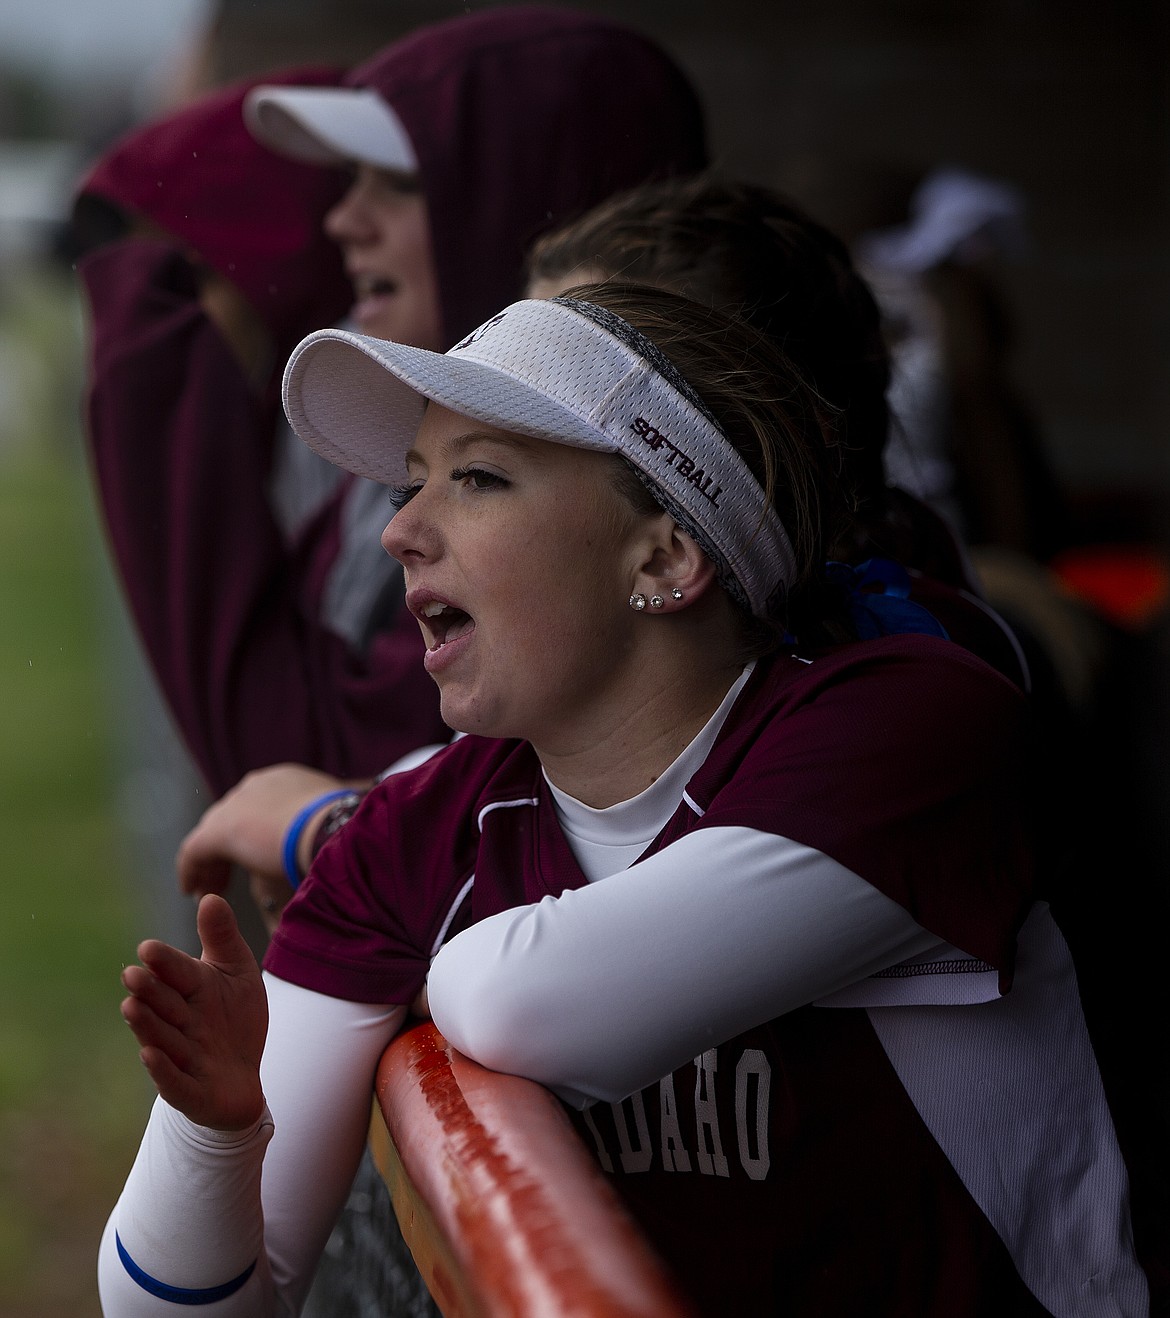 Megan Carver of North Idaho College cheers for her teammate at bat against Big Bend.